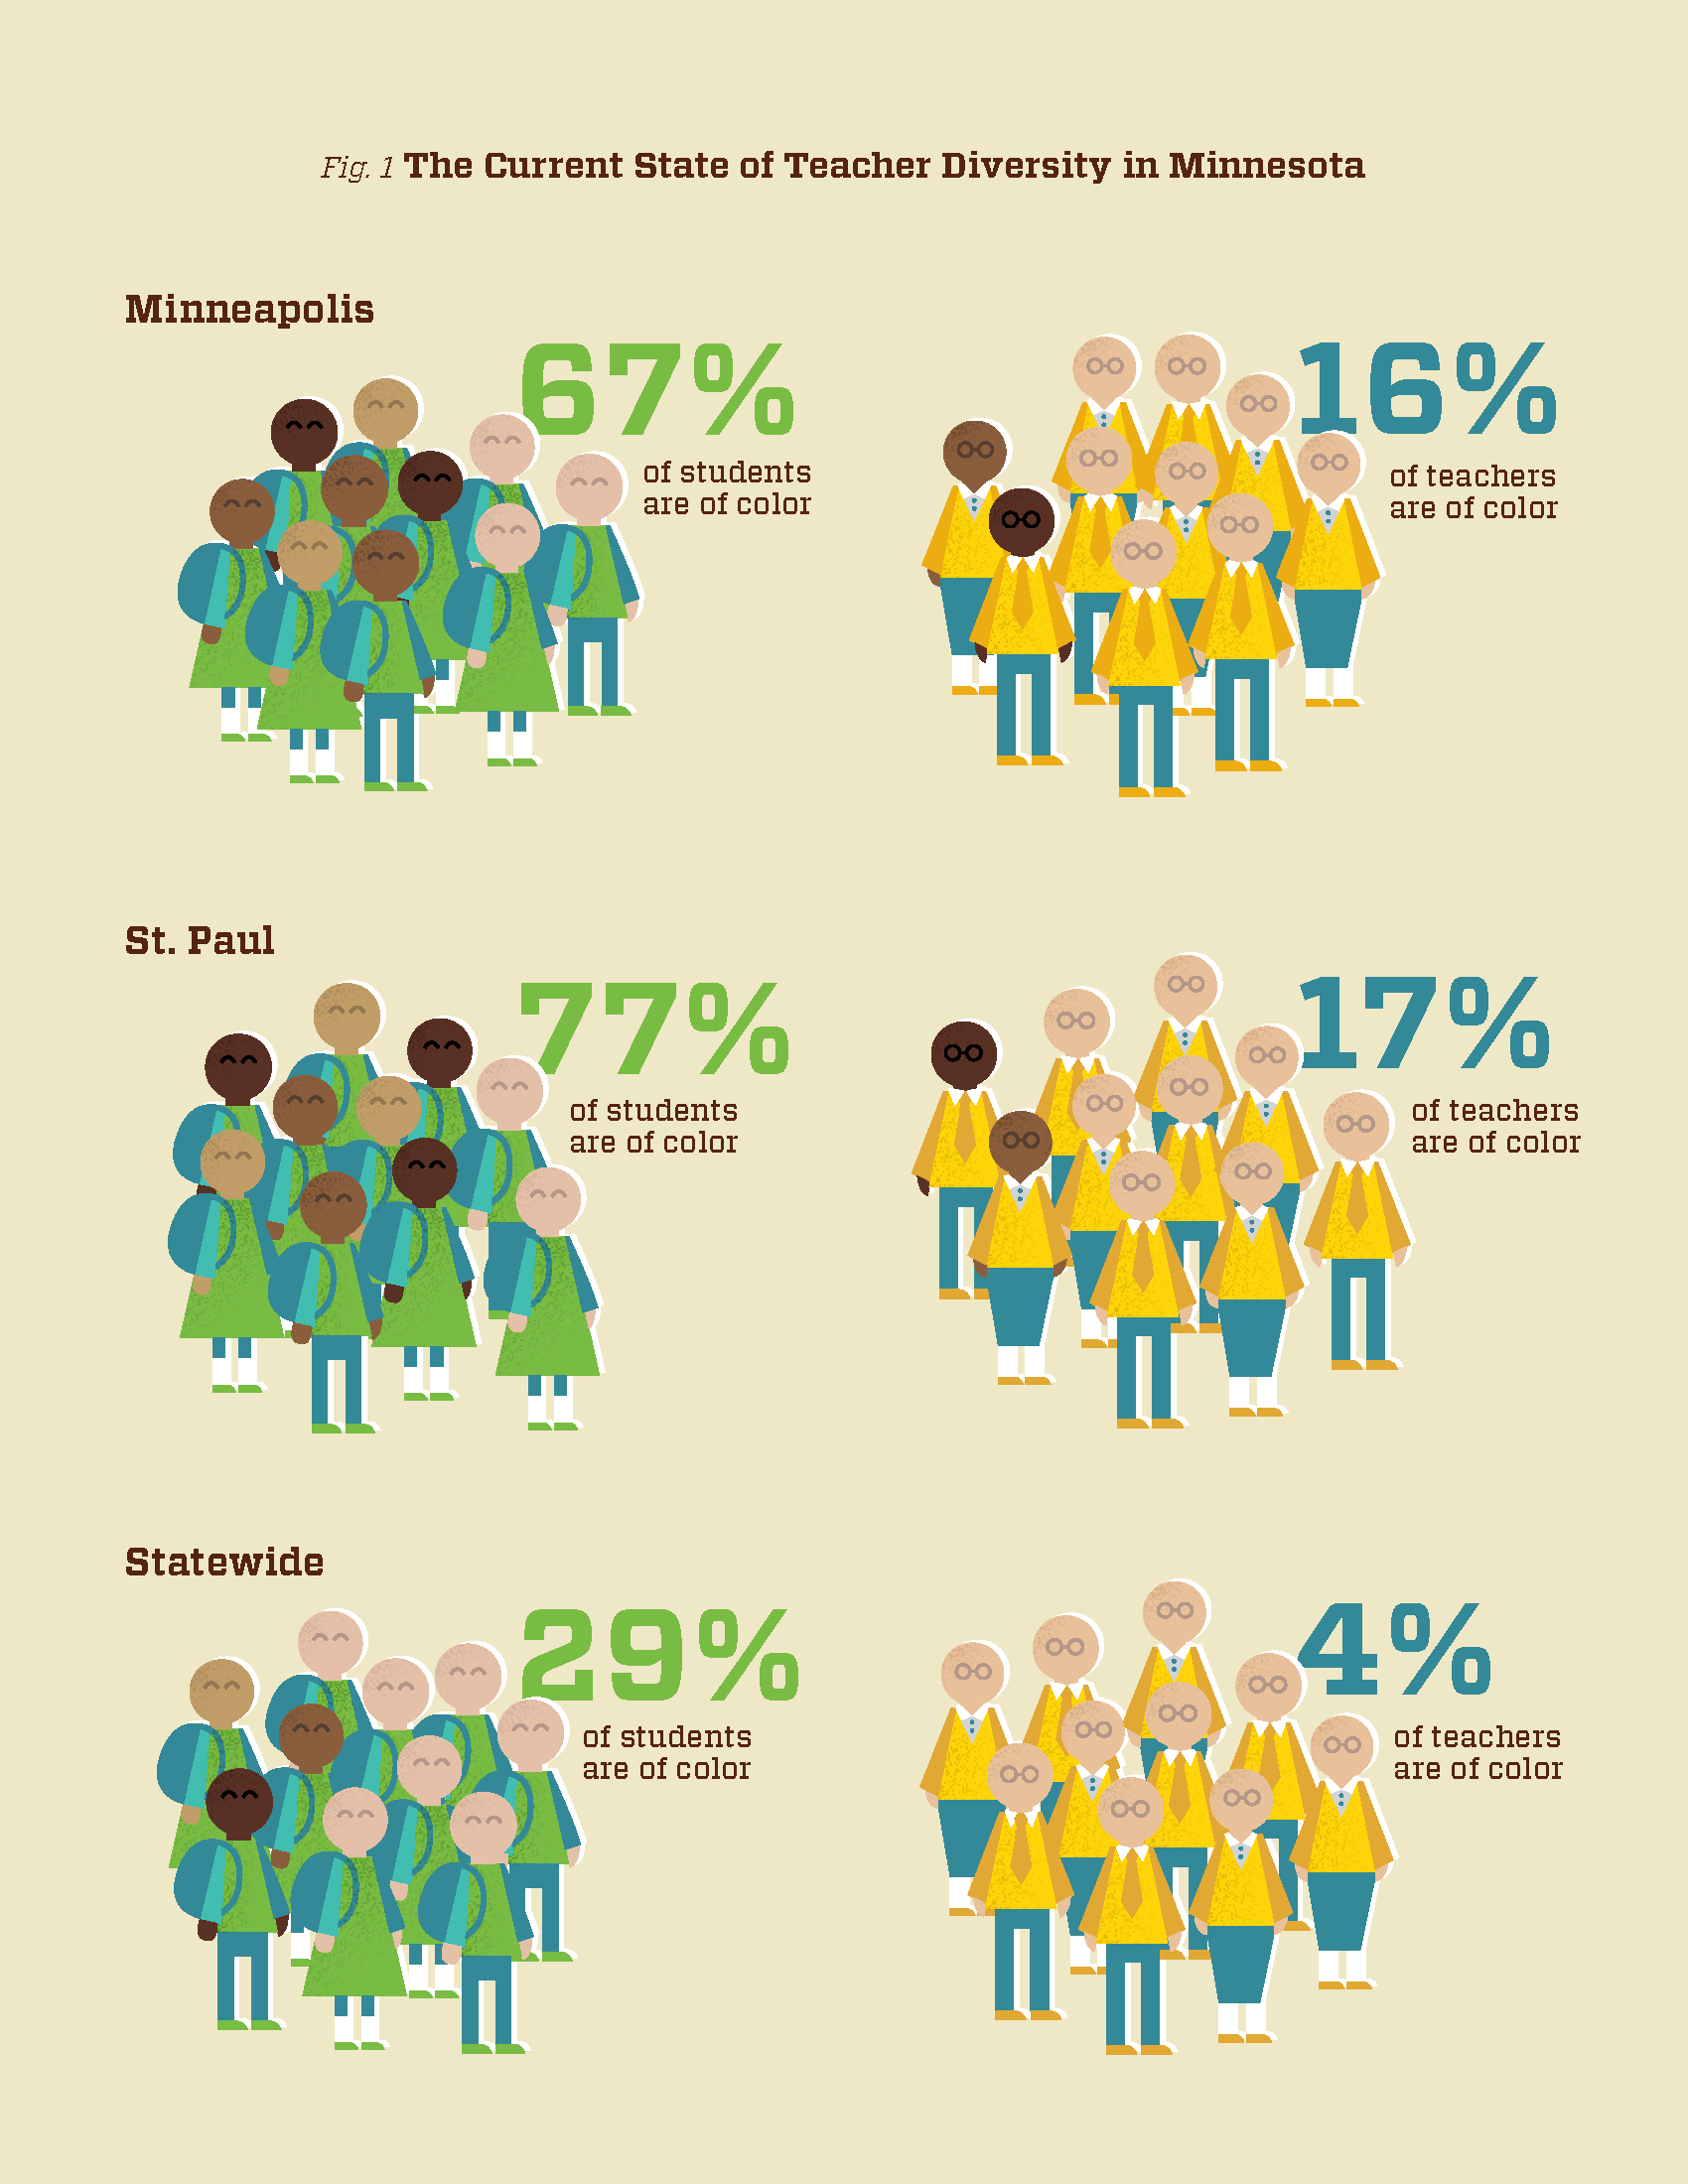 he current state of teacher diversity in Minnesota